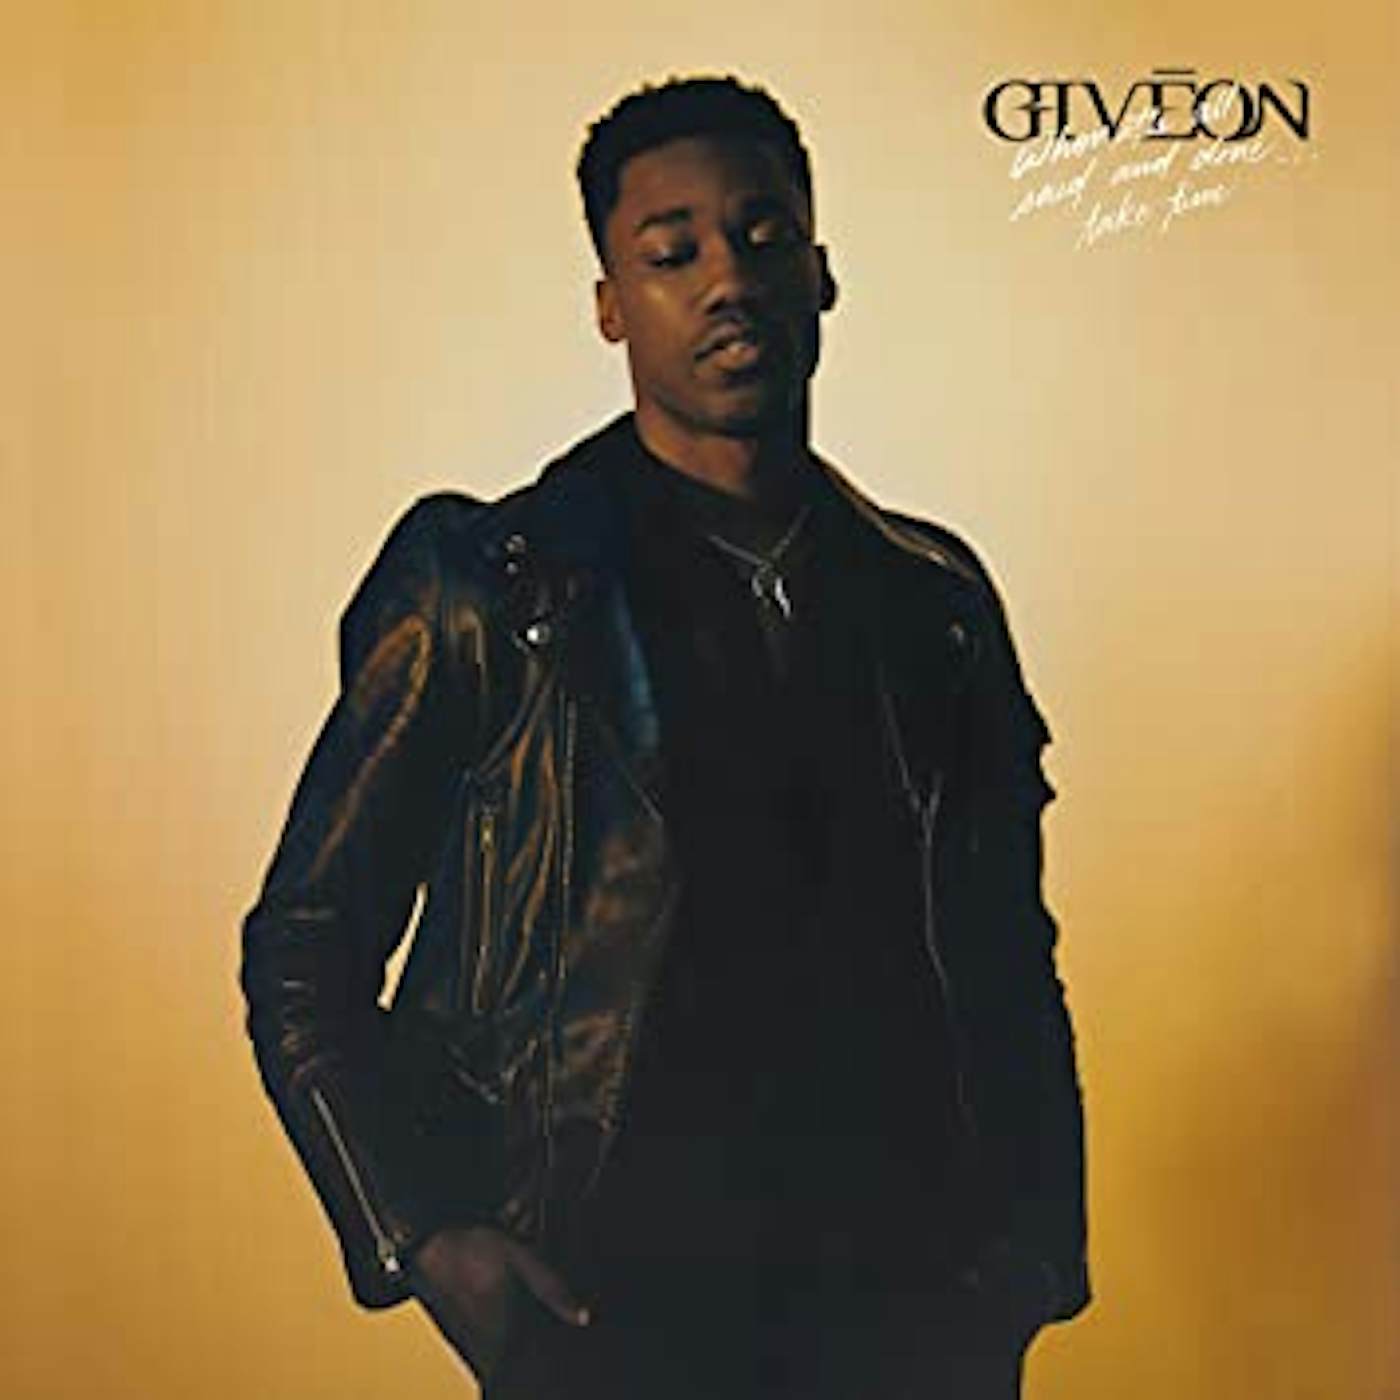 Giveon WHEN IT'S ALL SAID AND DONE: TAKE TIME Vinyl Record